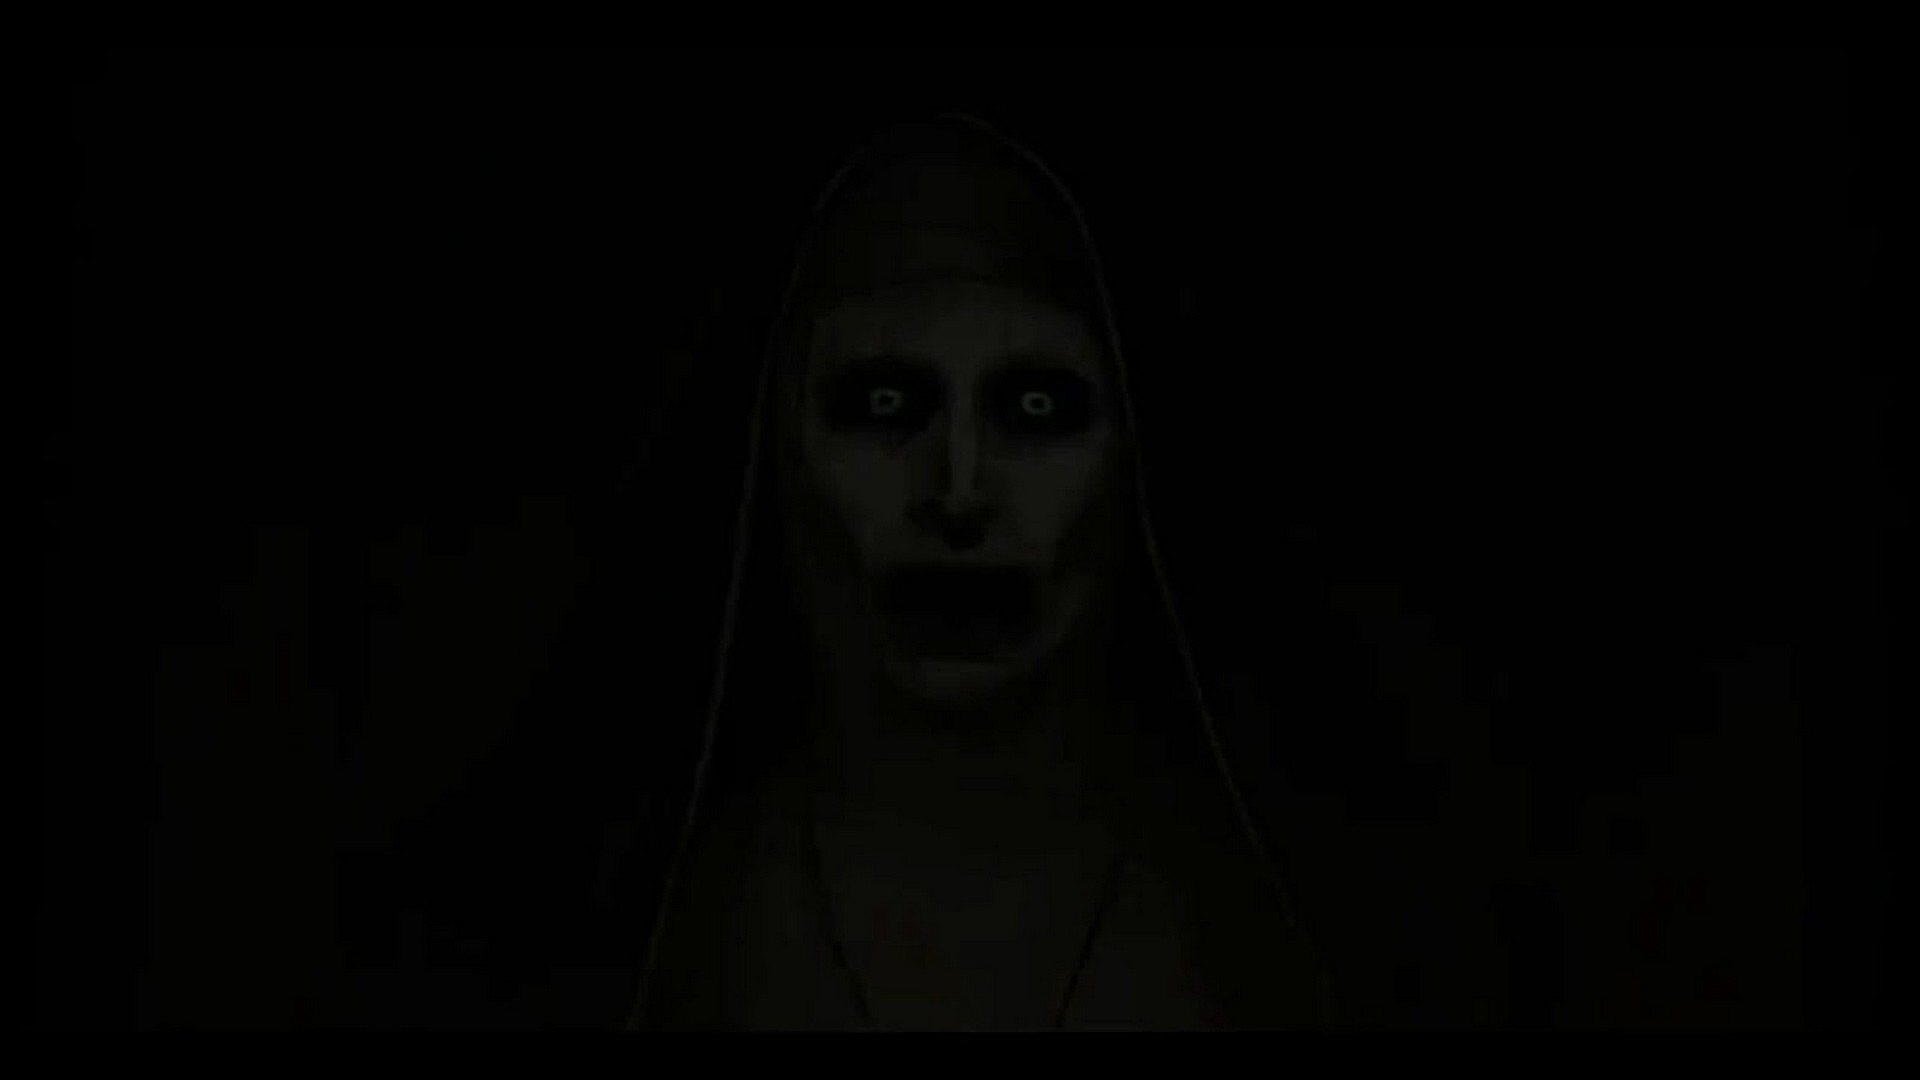 The Nun Valak HD Wallpaper With Resolution 1920X1080 pixel. You can make this wallpaper for your Desktop Computer Backgrounds, Mac Wallpapers, Android Lock screen or iPhone Screensavers